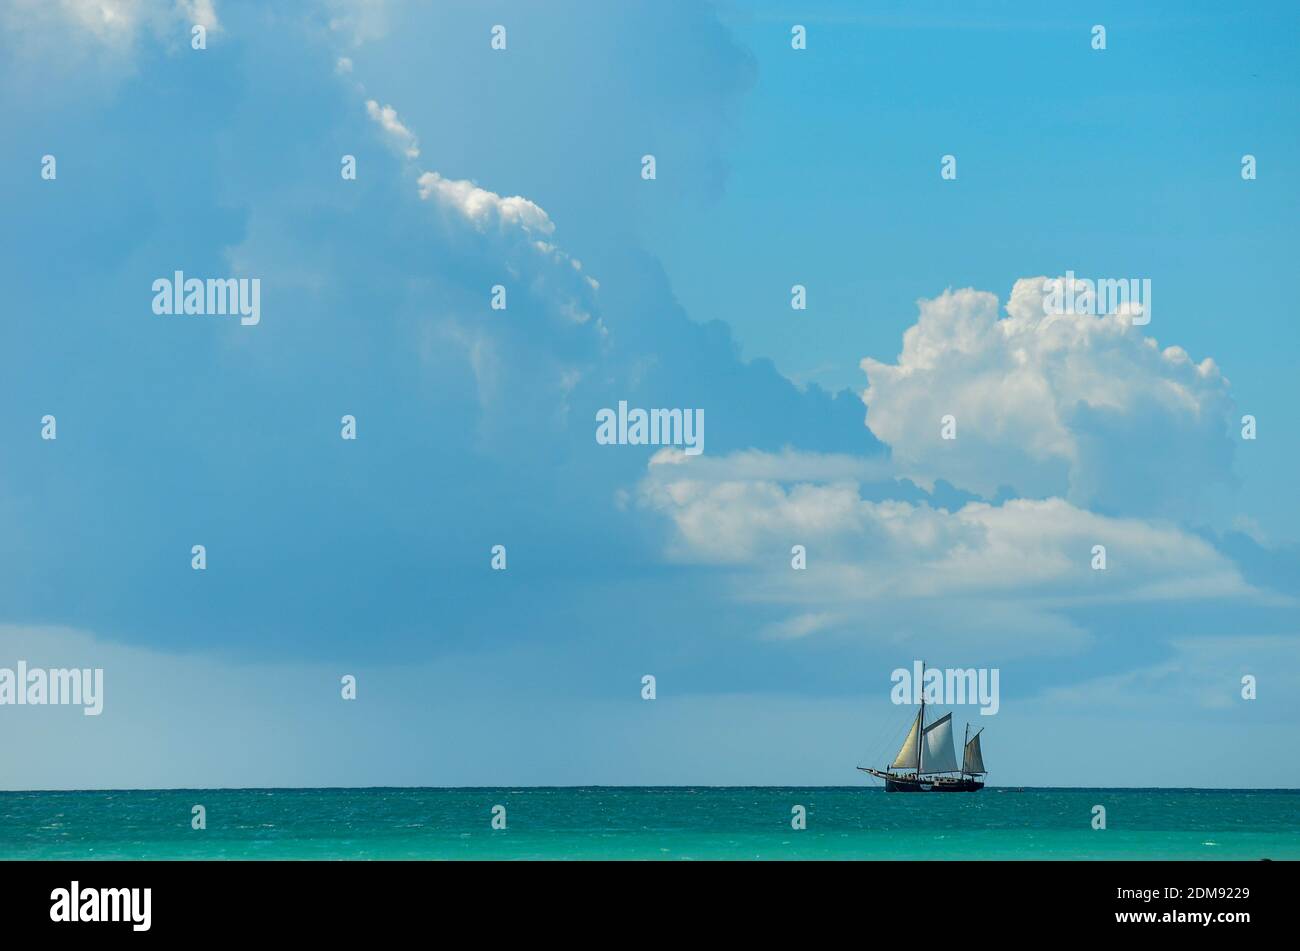 An old style ship with big sails at the horizon under a cloudy sky Stock Photo